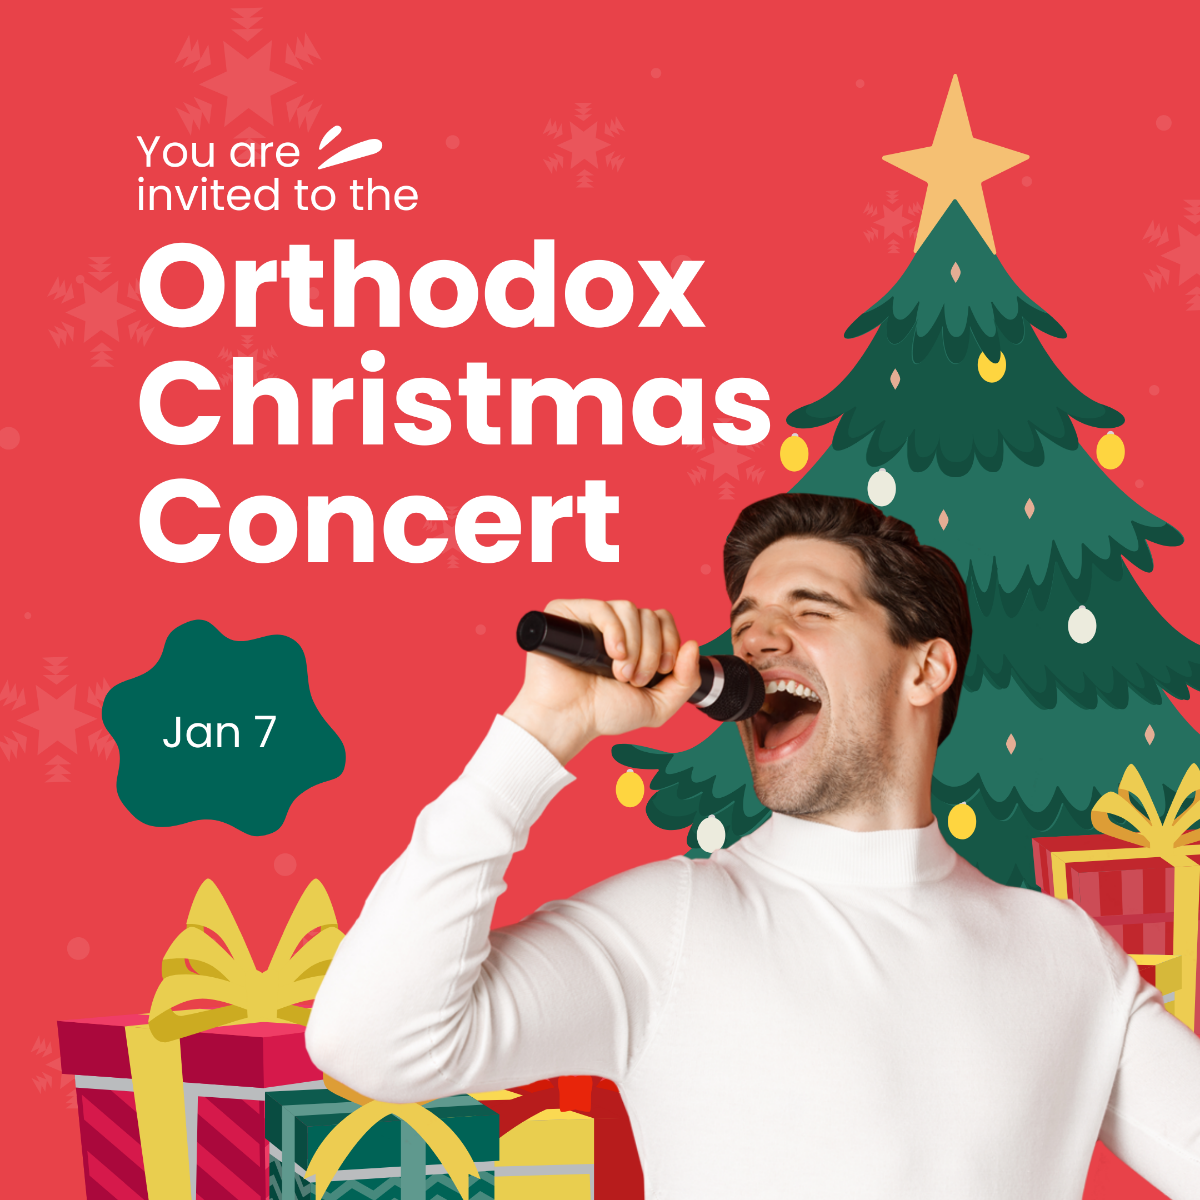 Free Orthodox Christmas Concert Instagram Post Template